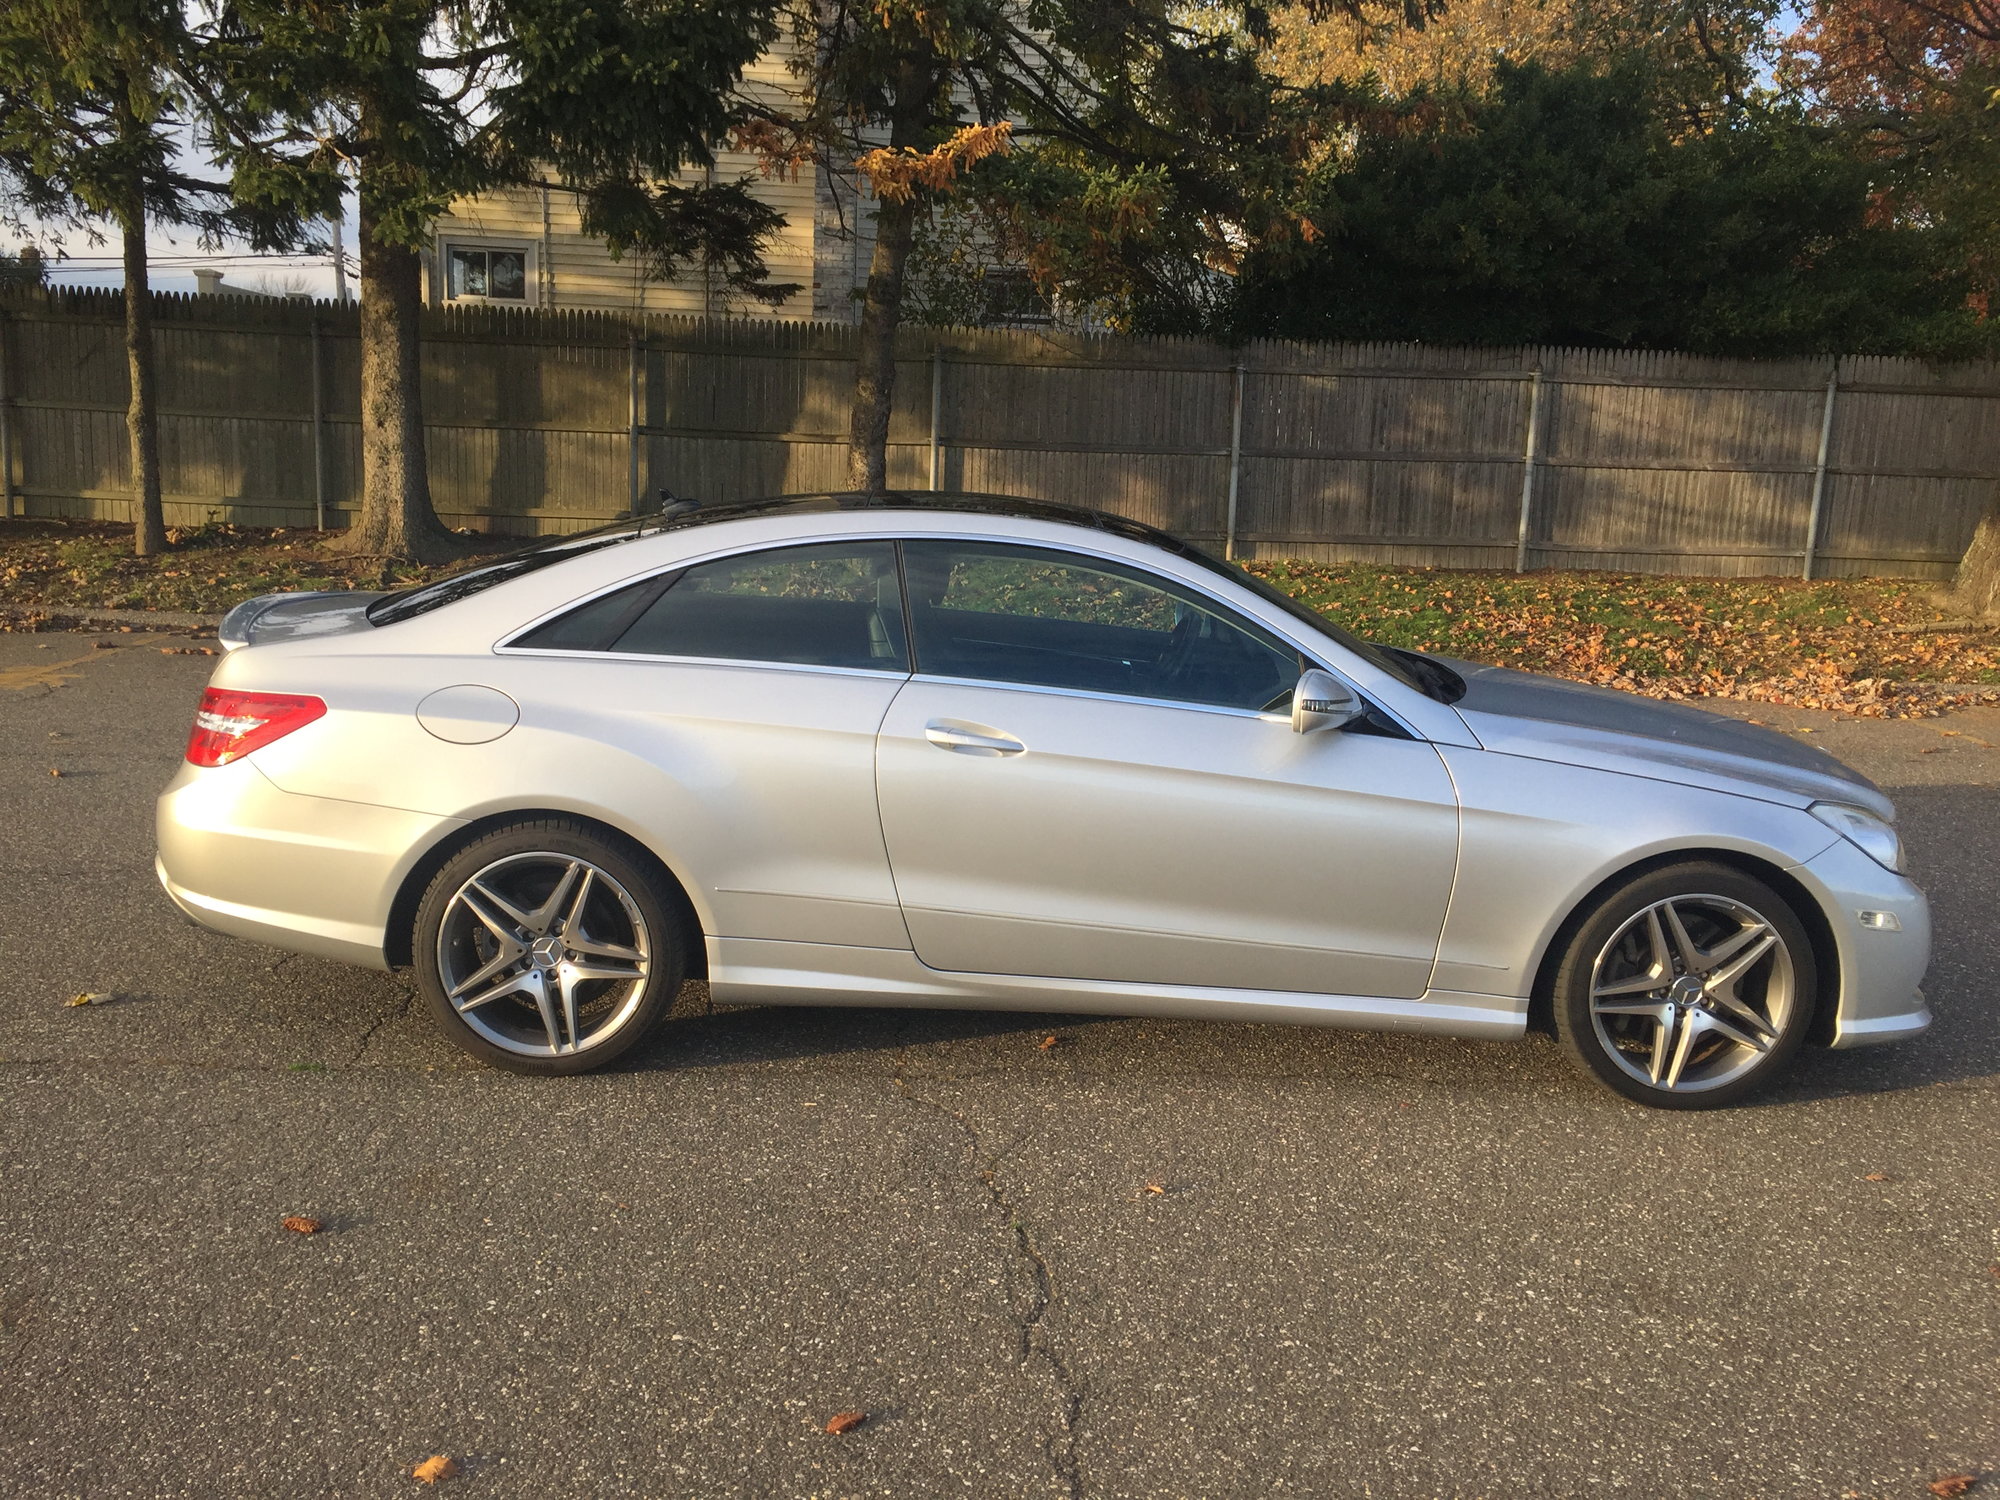 2010 Mercedes-Benz E550 - 2010 E550 Coupe in excellent condition - Used - VIN WBAHE6323RGF28057 - 87,000 Miles - 8 cyl - 2WD - Automatic - Coupe - Silver - Massapequa Park, NY 11762, United States